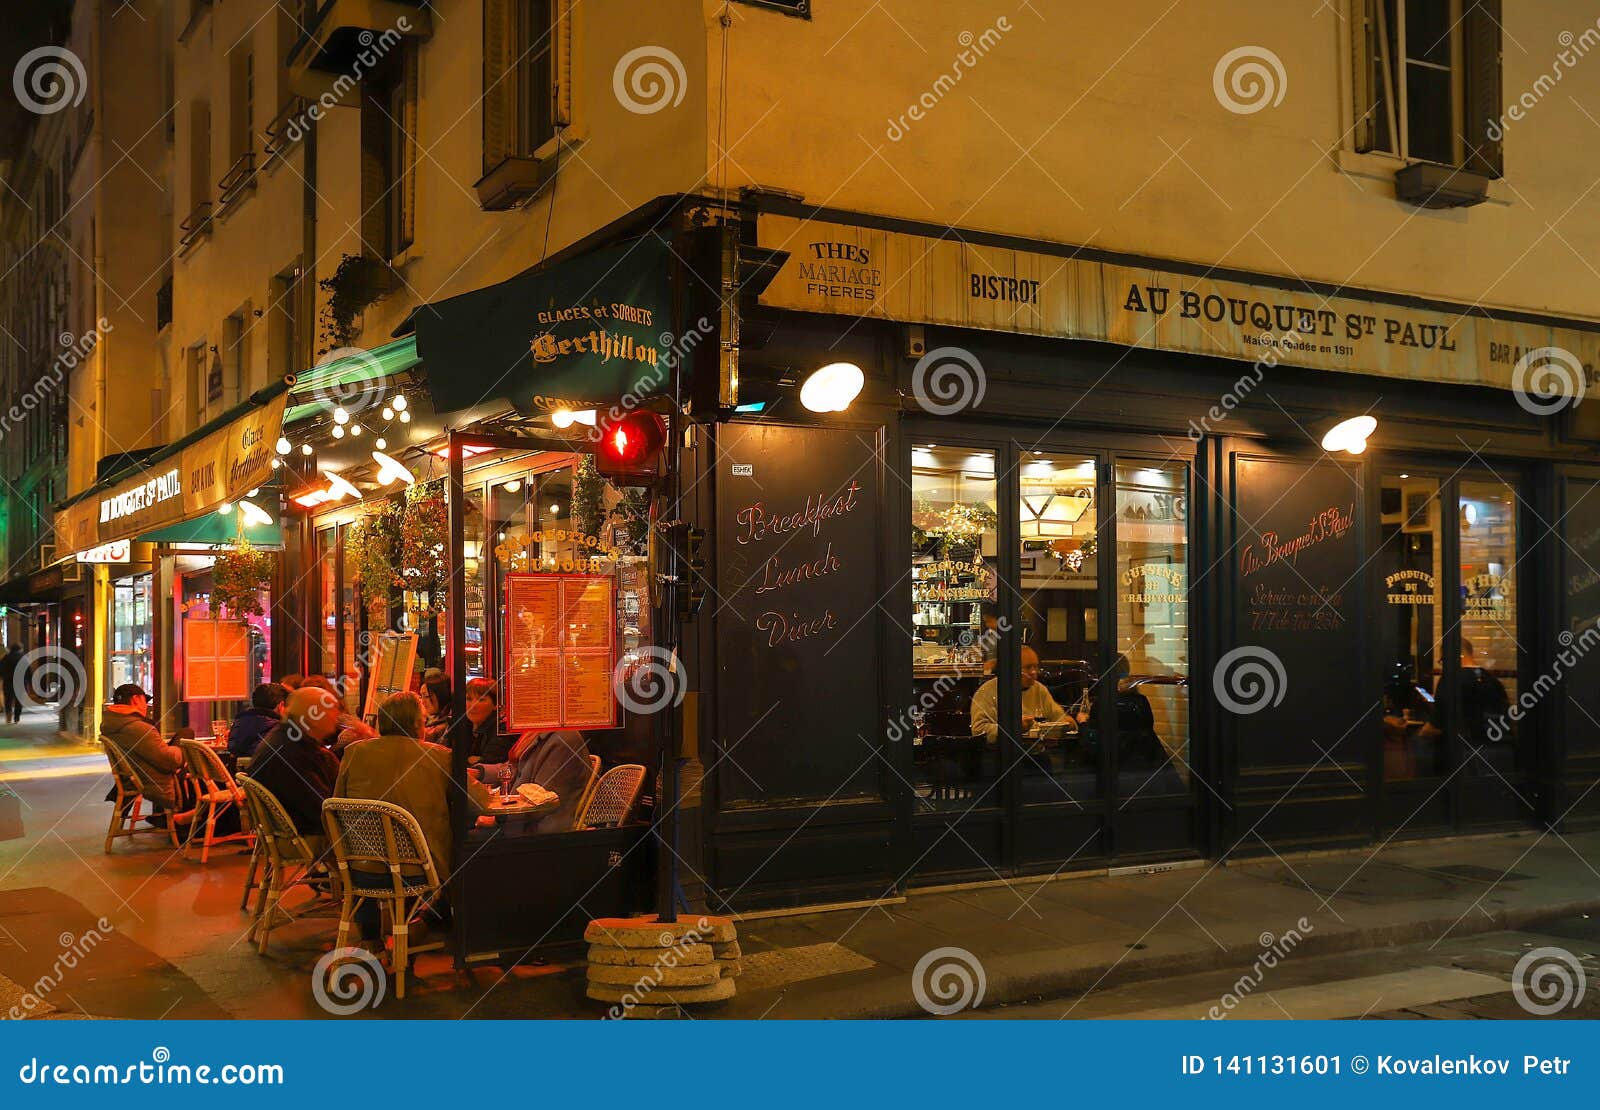 View of Typical French Cafe Au Bouquet St. Paul in the Quarter Marais ...